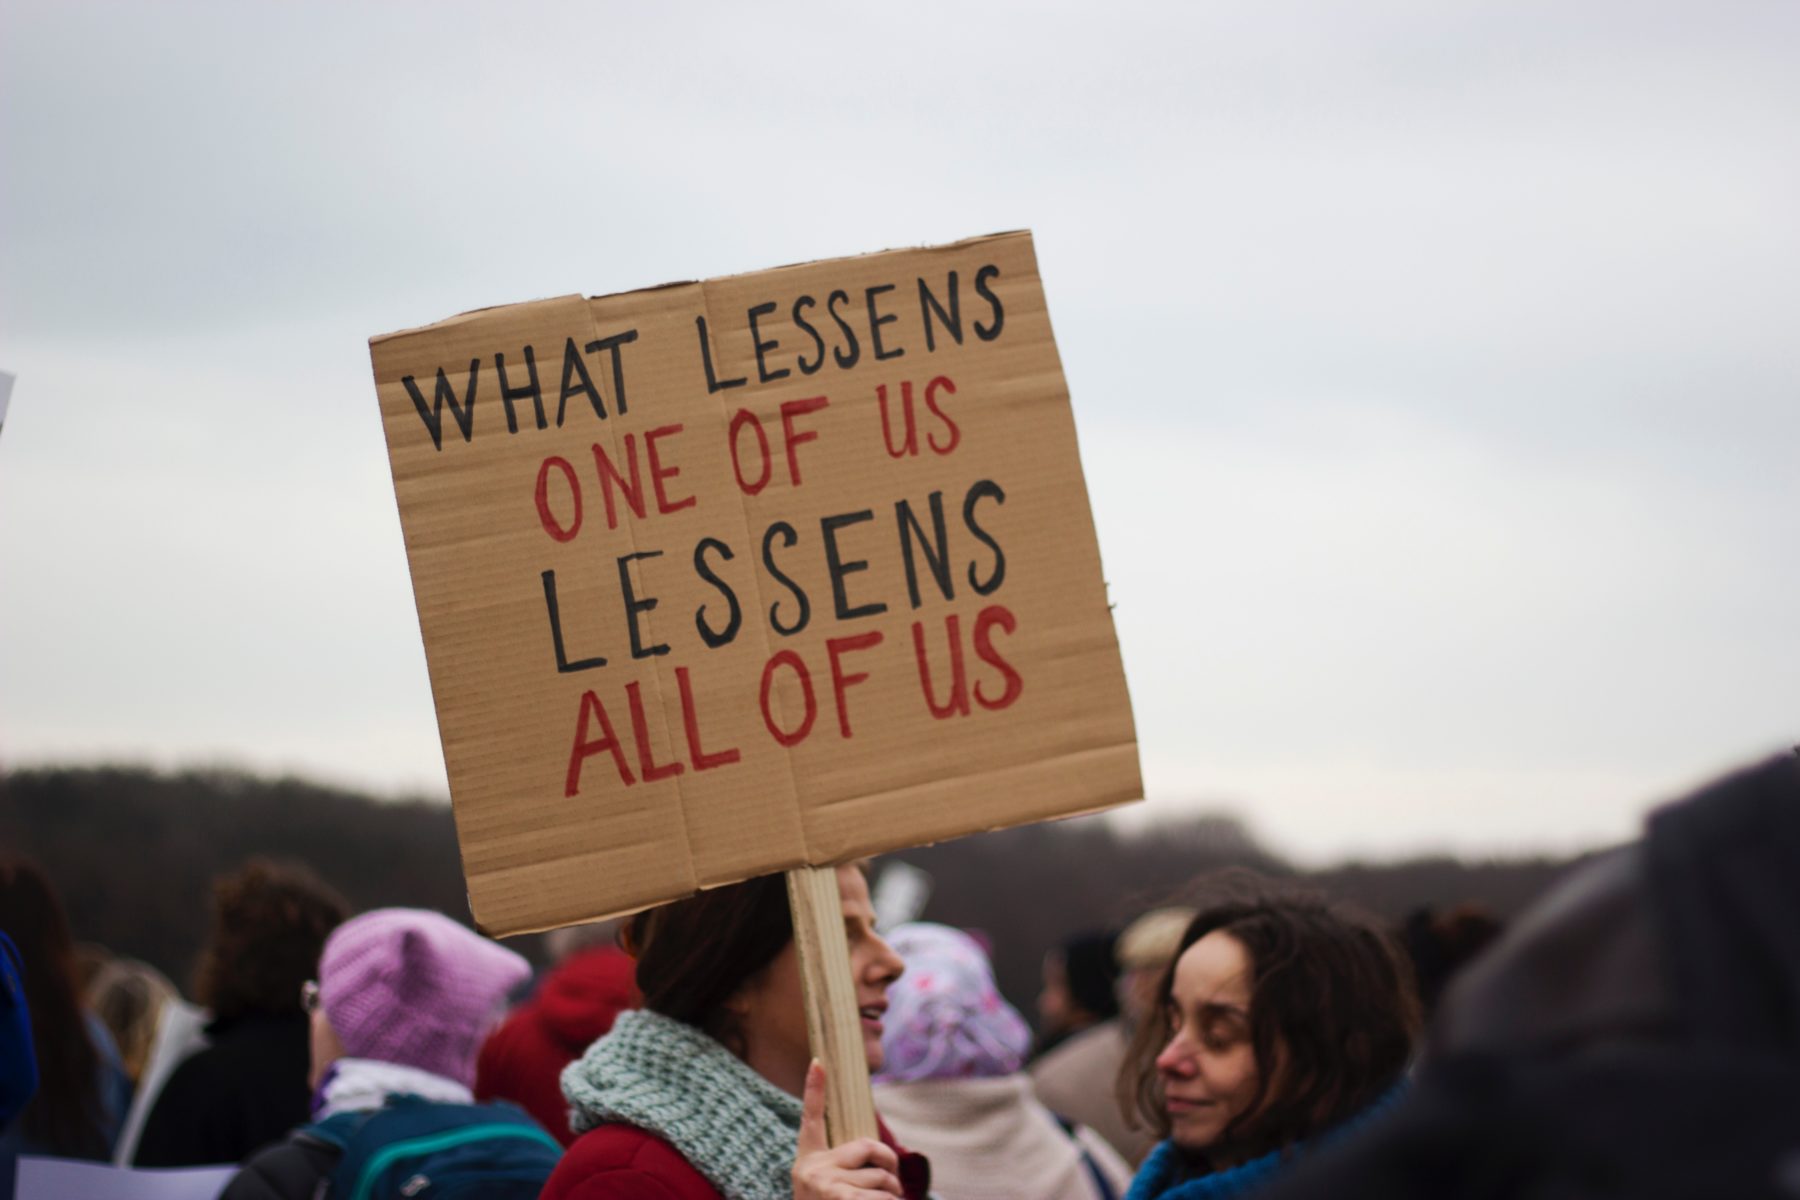 A young women holding a placard at a rally which says "What lessens one of us lessons all of us."